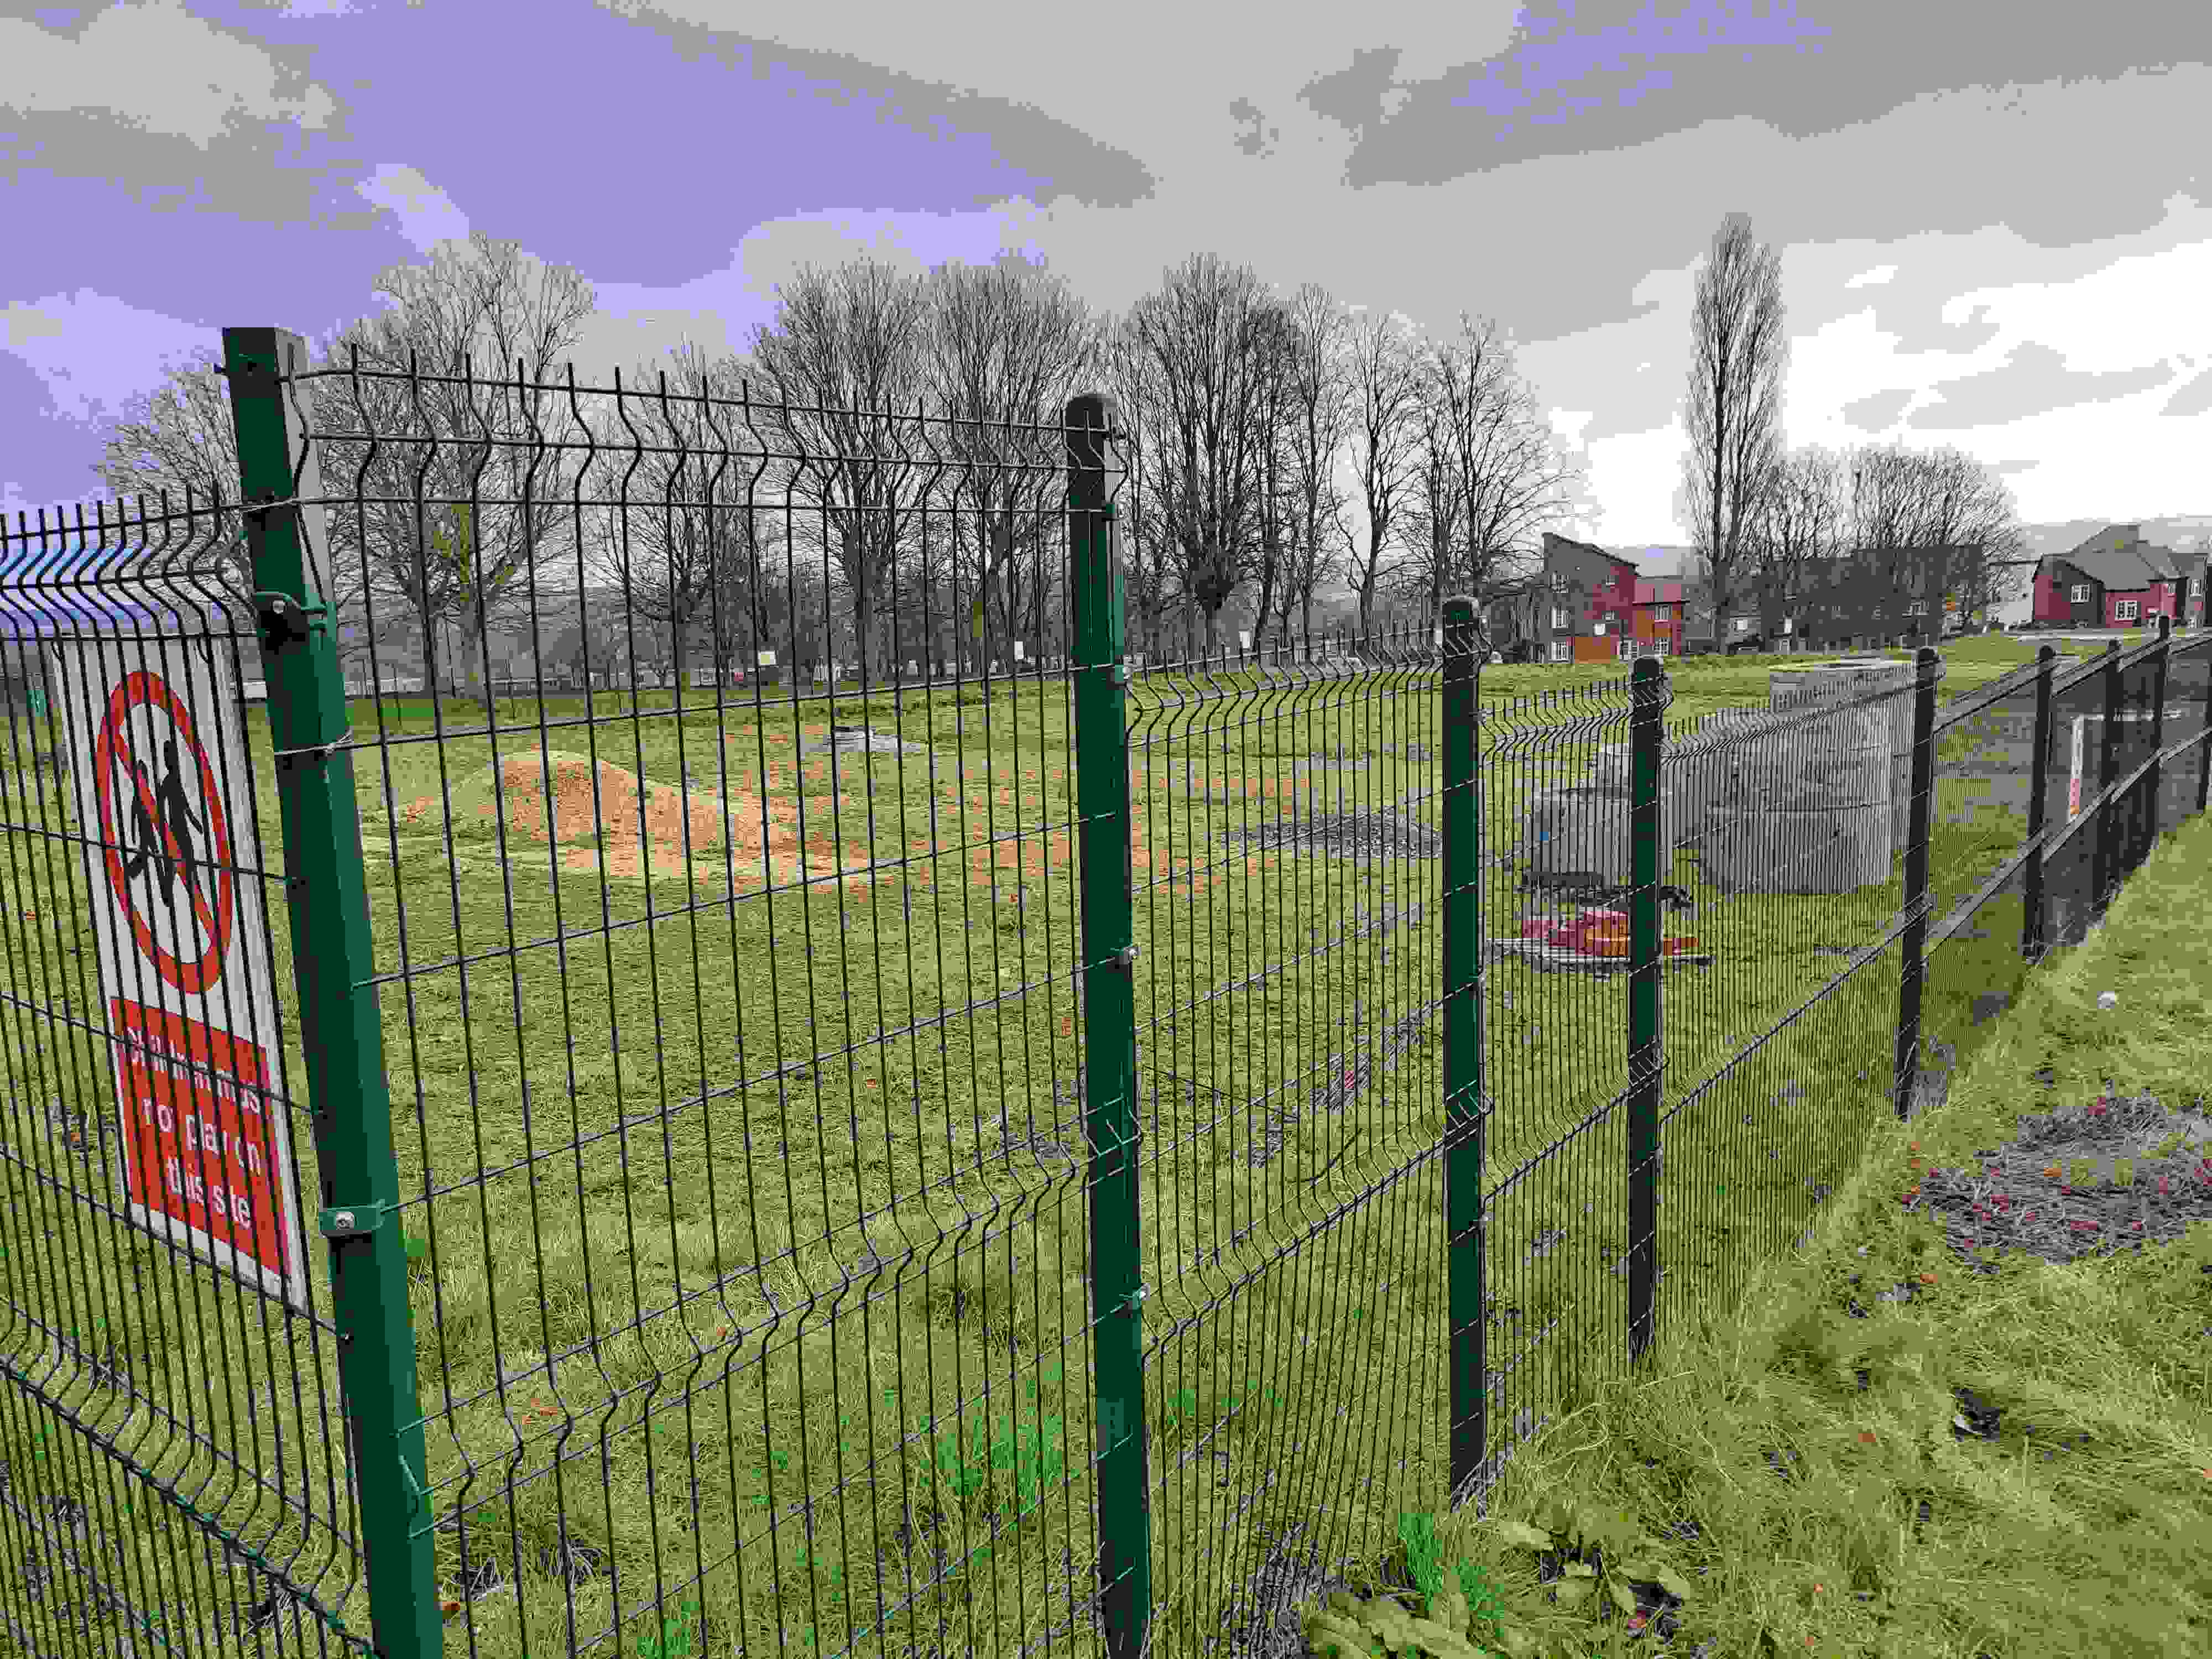 The second development site for council homes in Newstead, Sheffield, is surrounded by a green fence